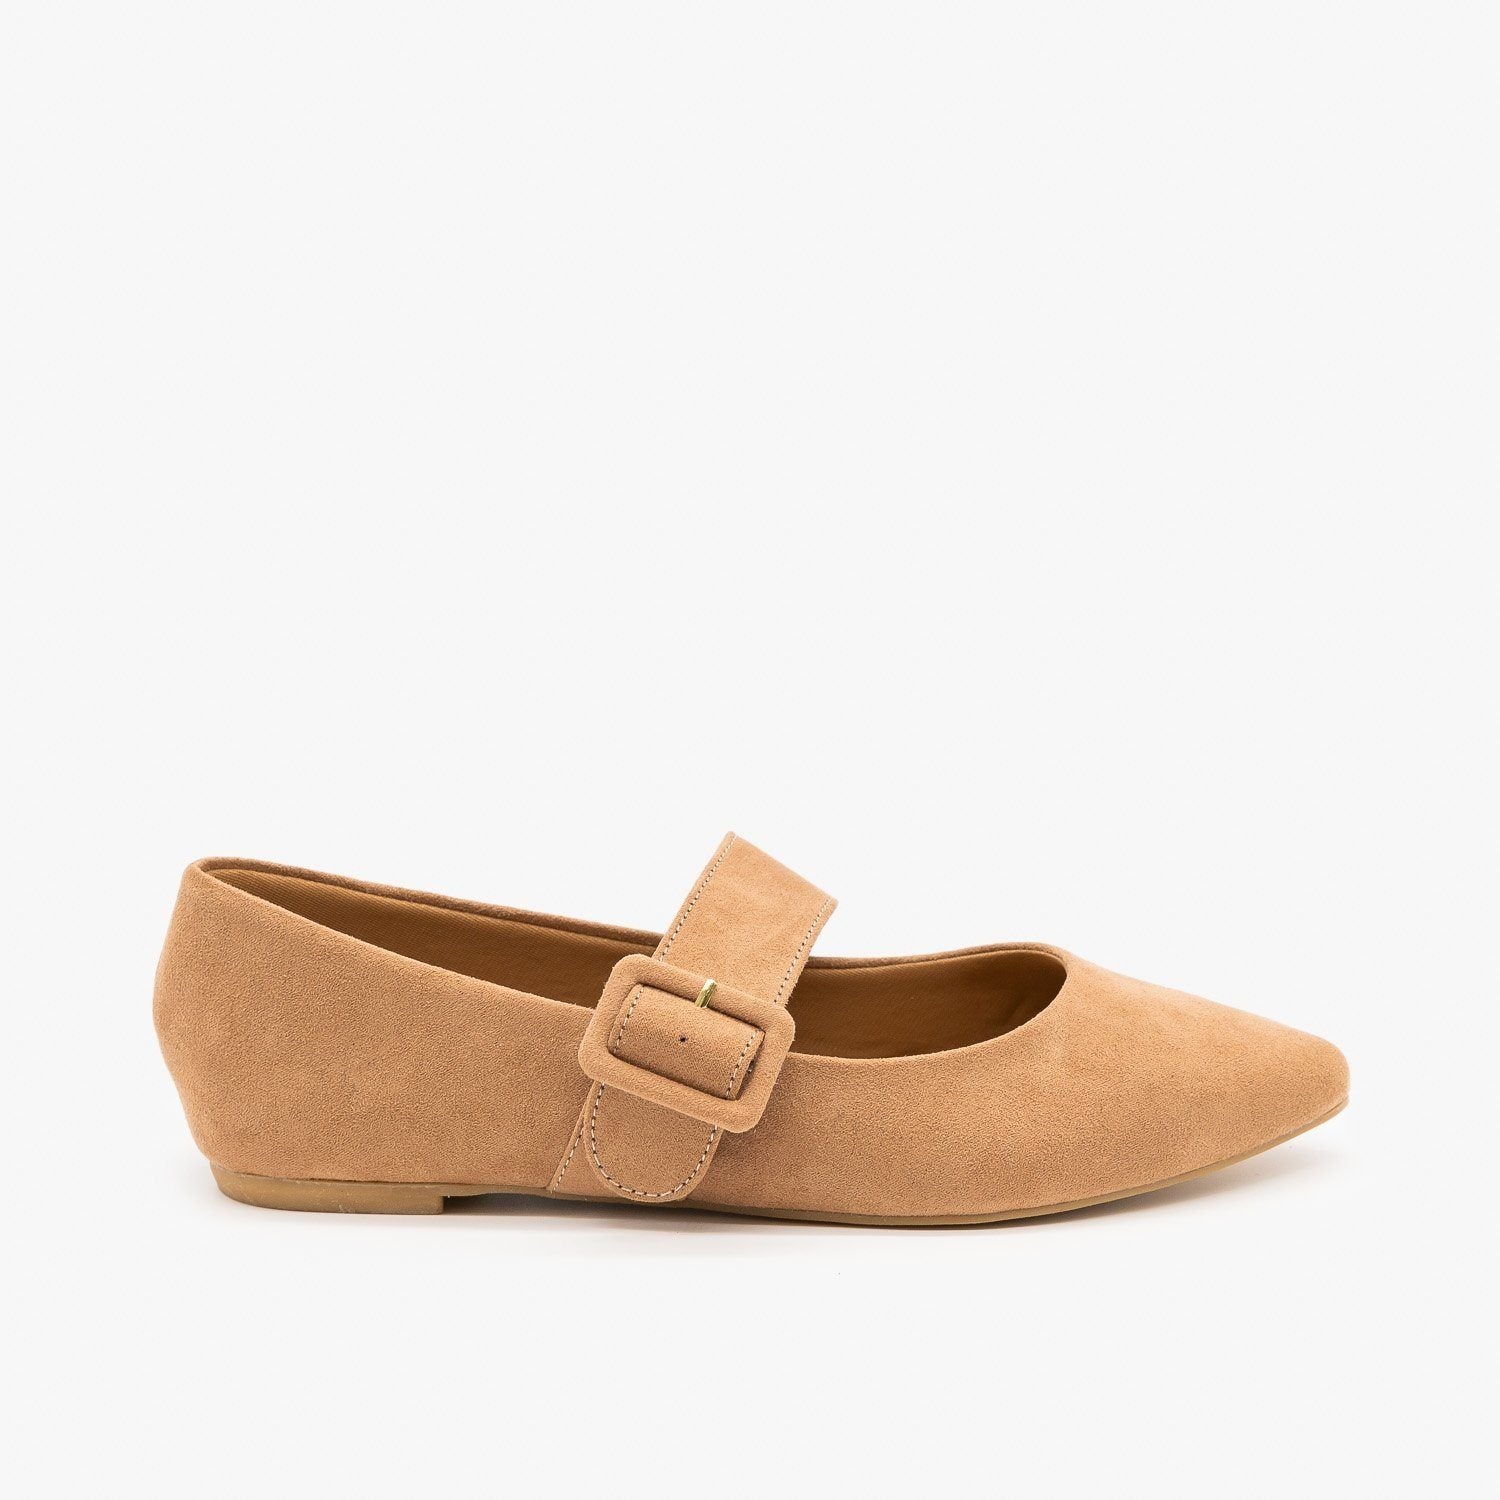 bamboo flats shoes